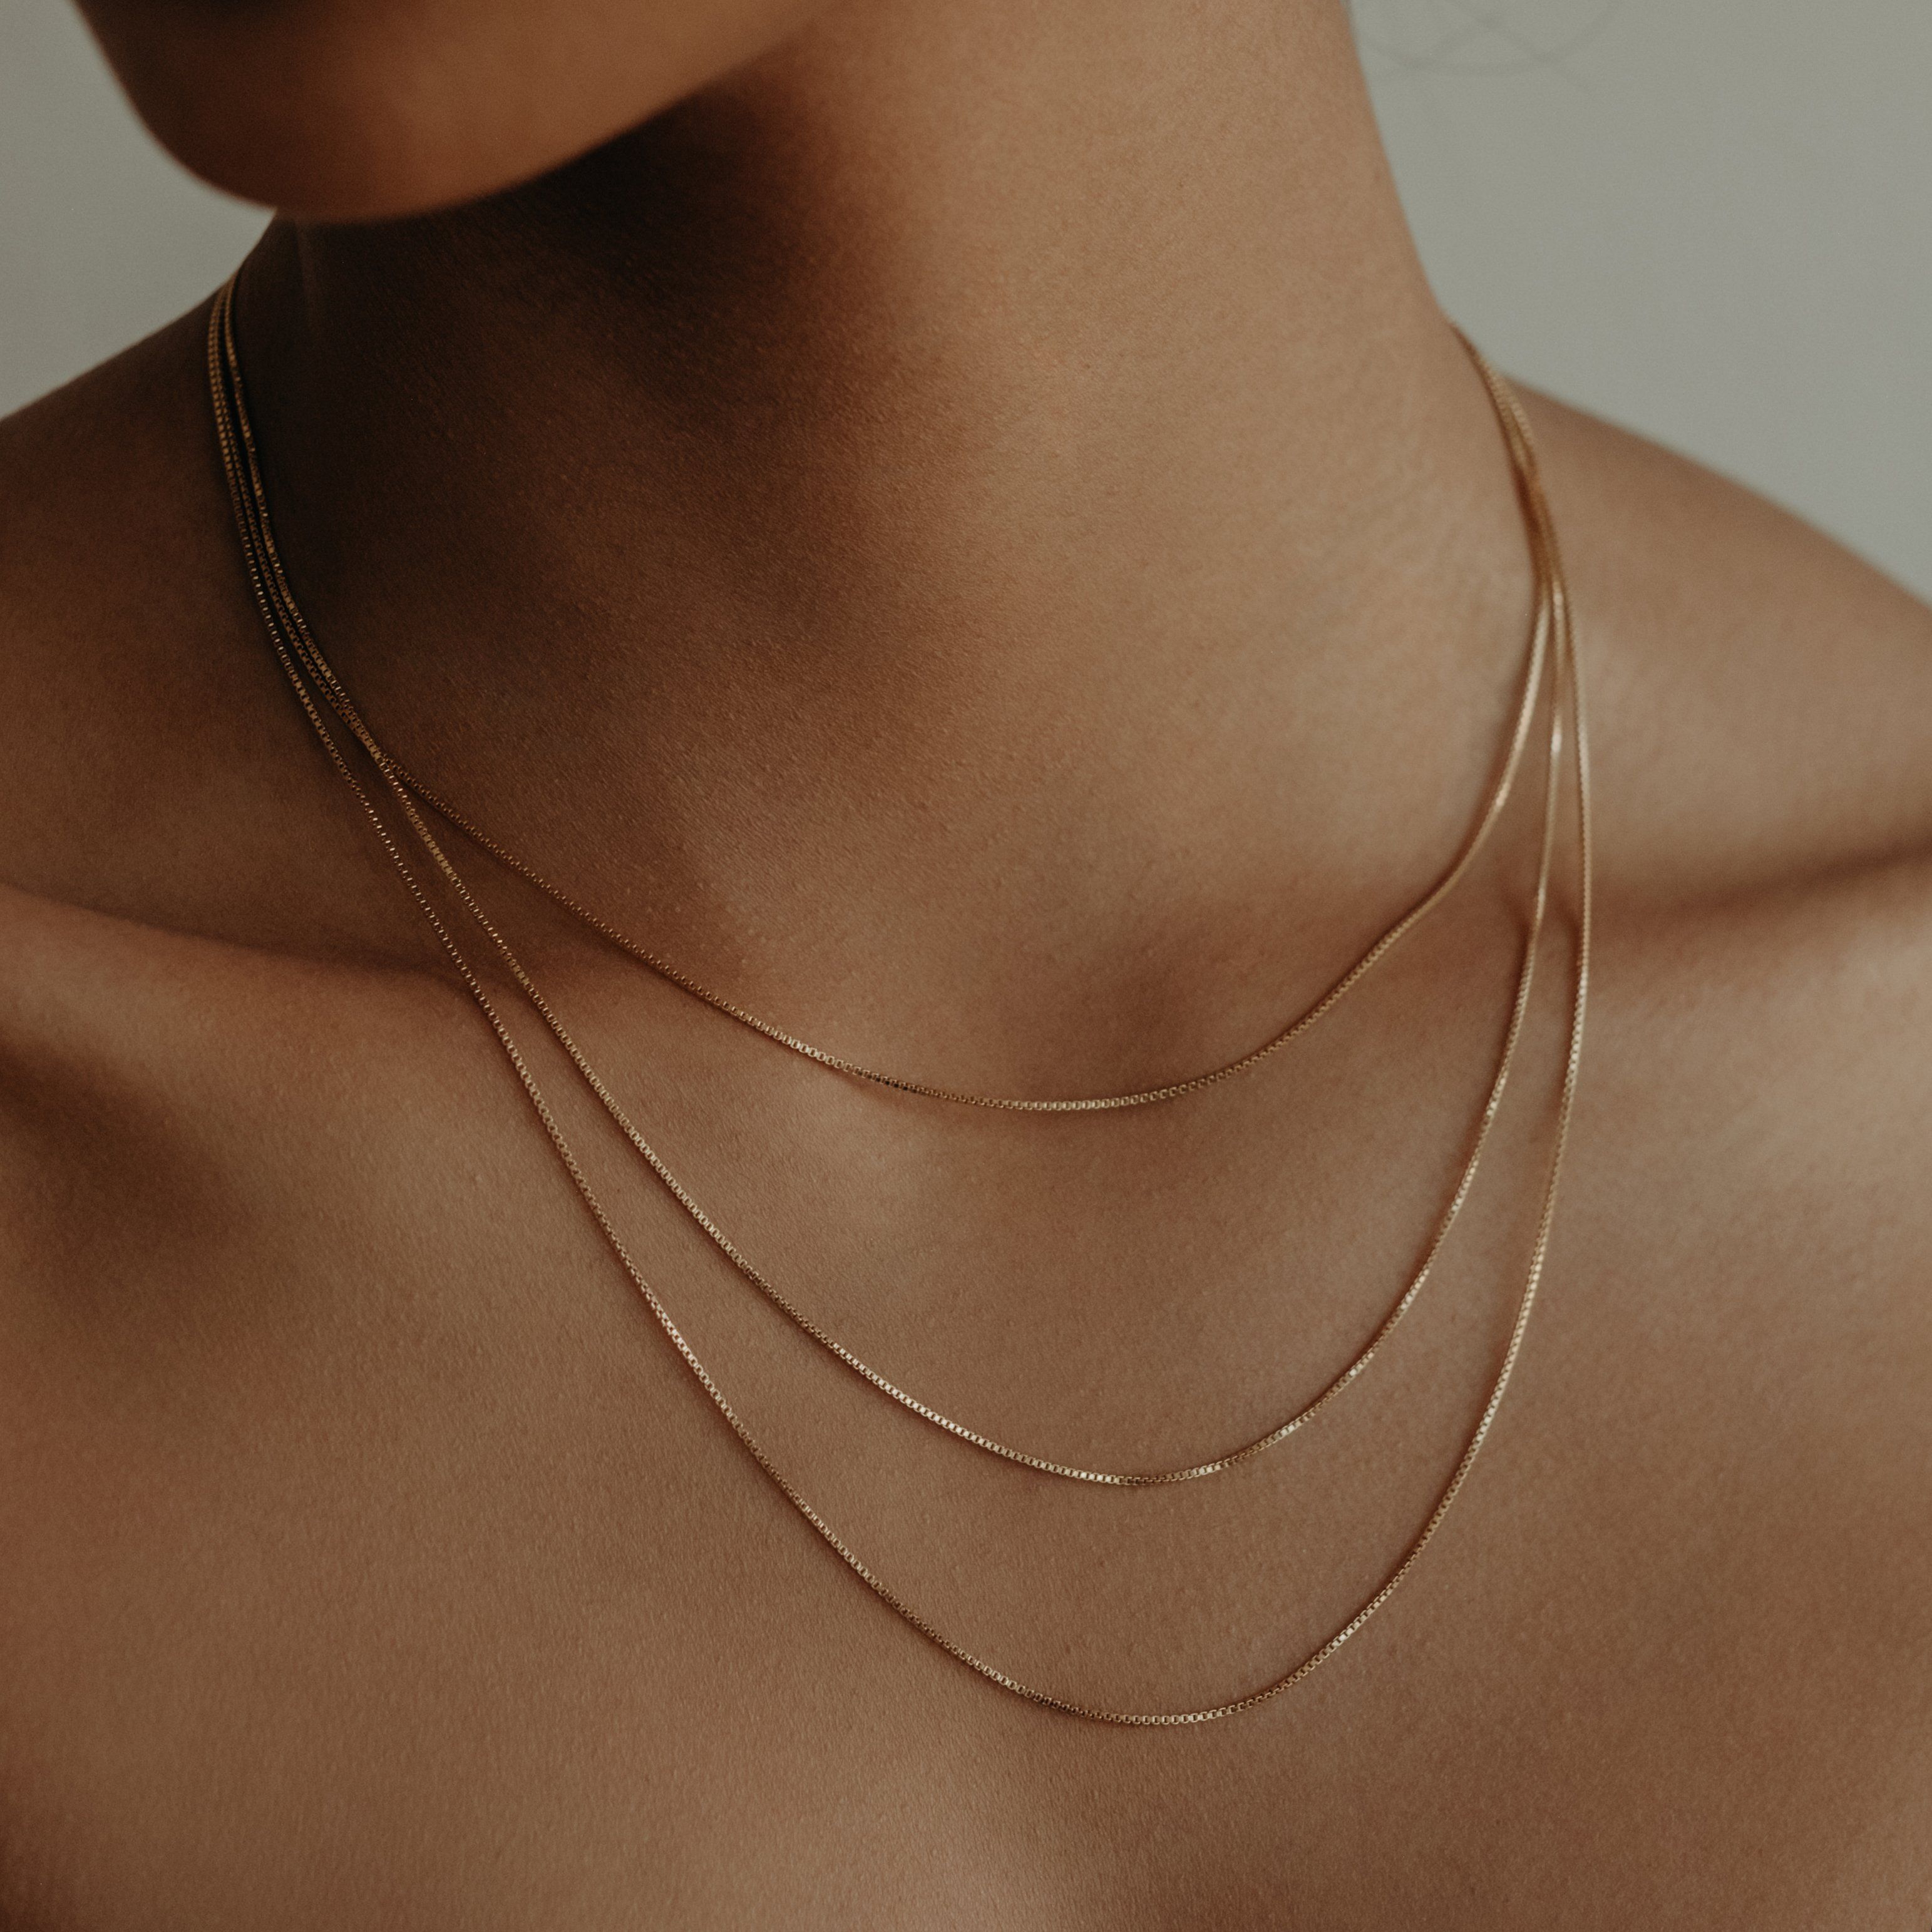 Metal Color: 8024 with Box, Main Stone Color: Silver Davitu TL Round Shaped Ceramic Necklace Chain Necklace Link with Simple Silver Star Smooth Thin Necklace for Women 